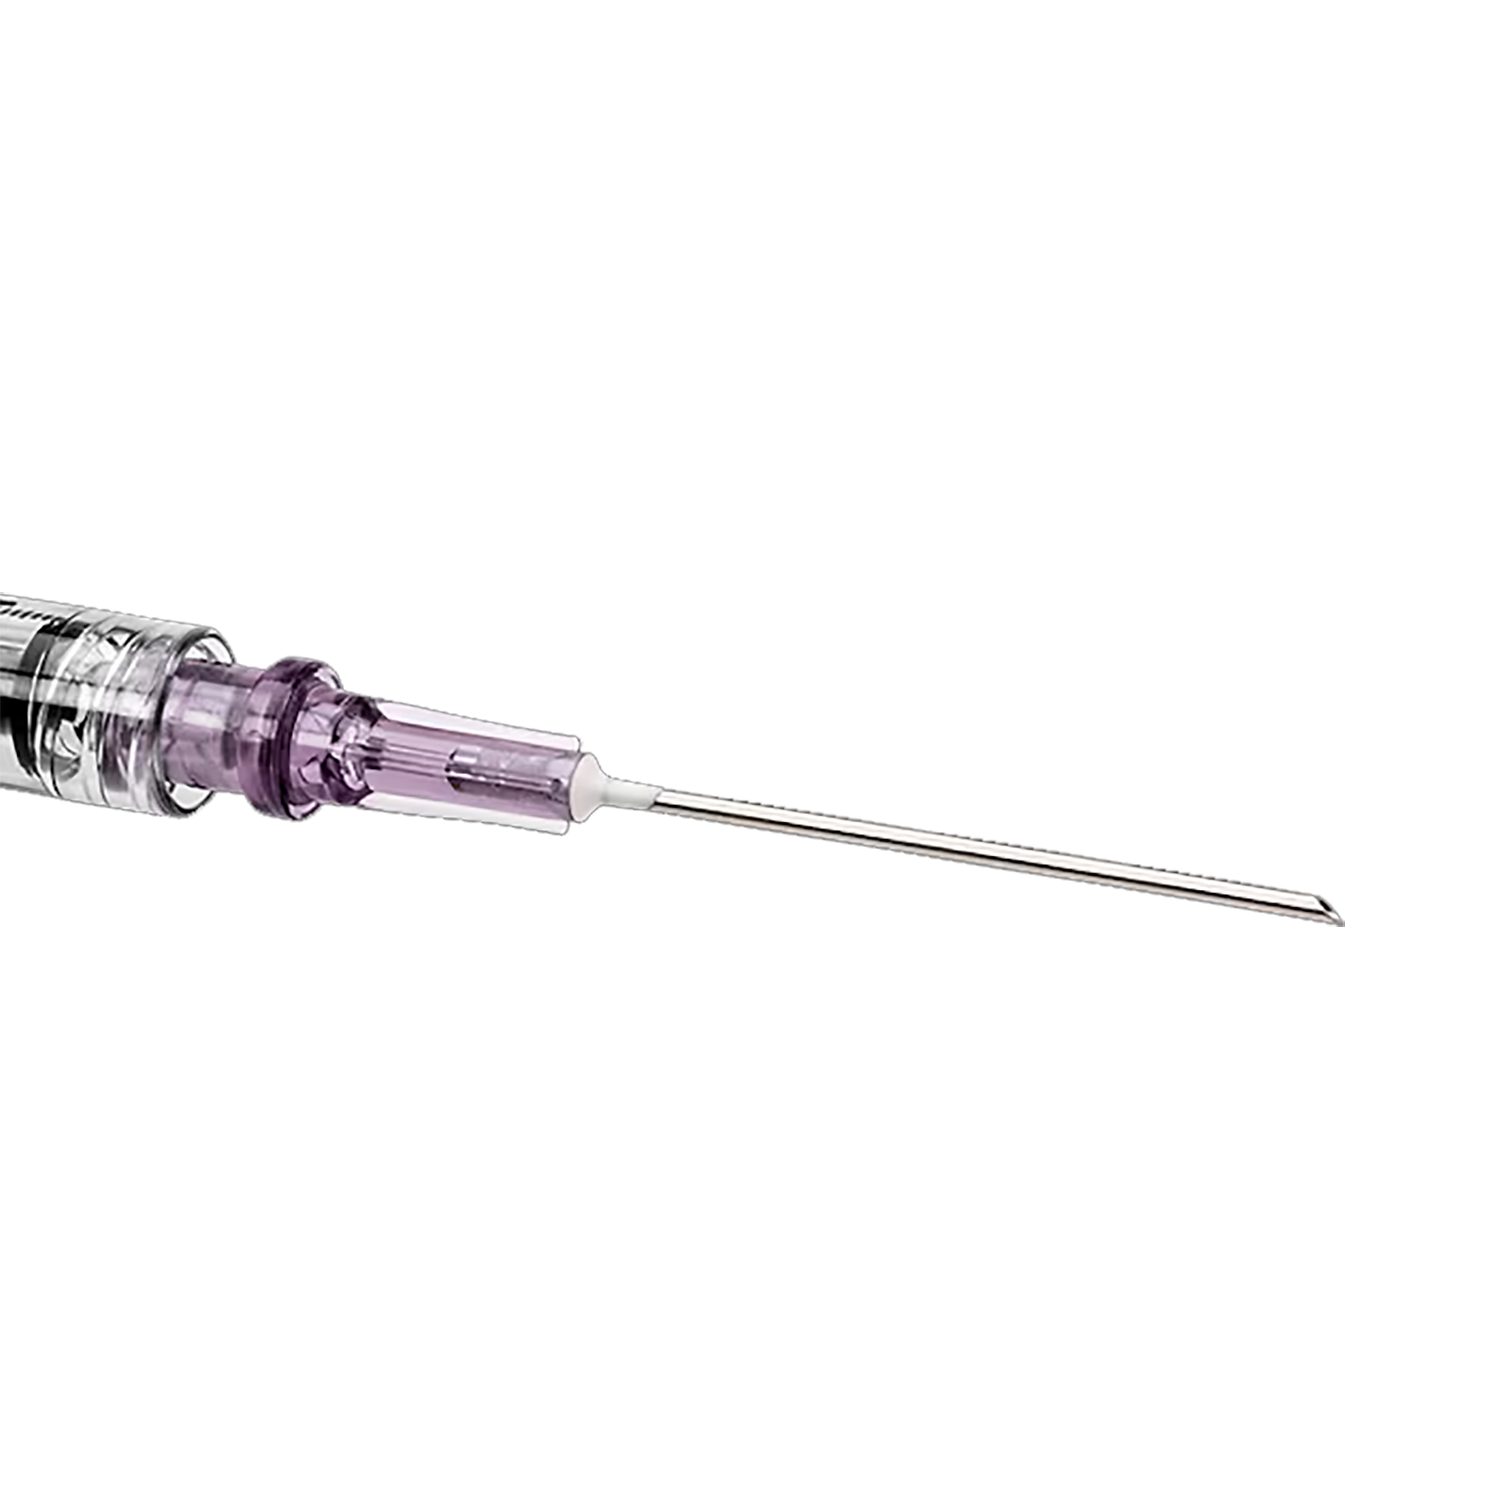 BD Blunt Fill Needle | 18G x 1 1/2" | Pack of 1000 (1)